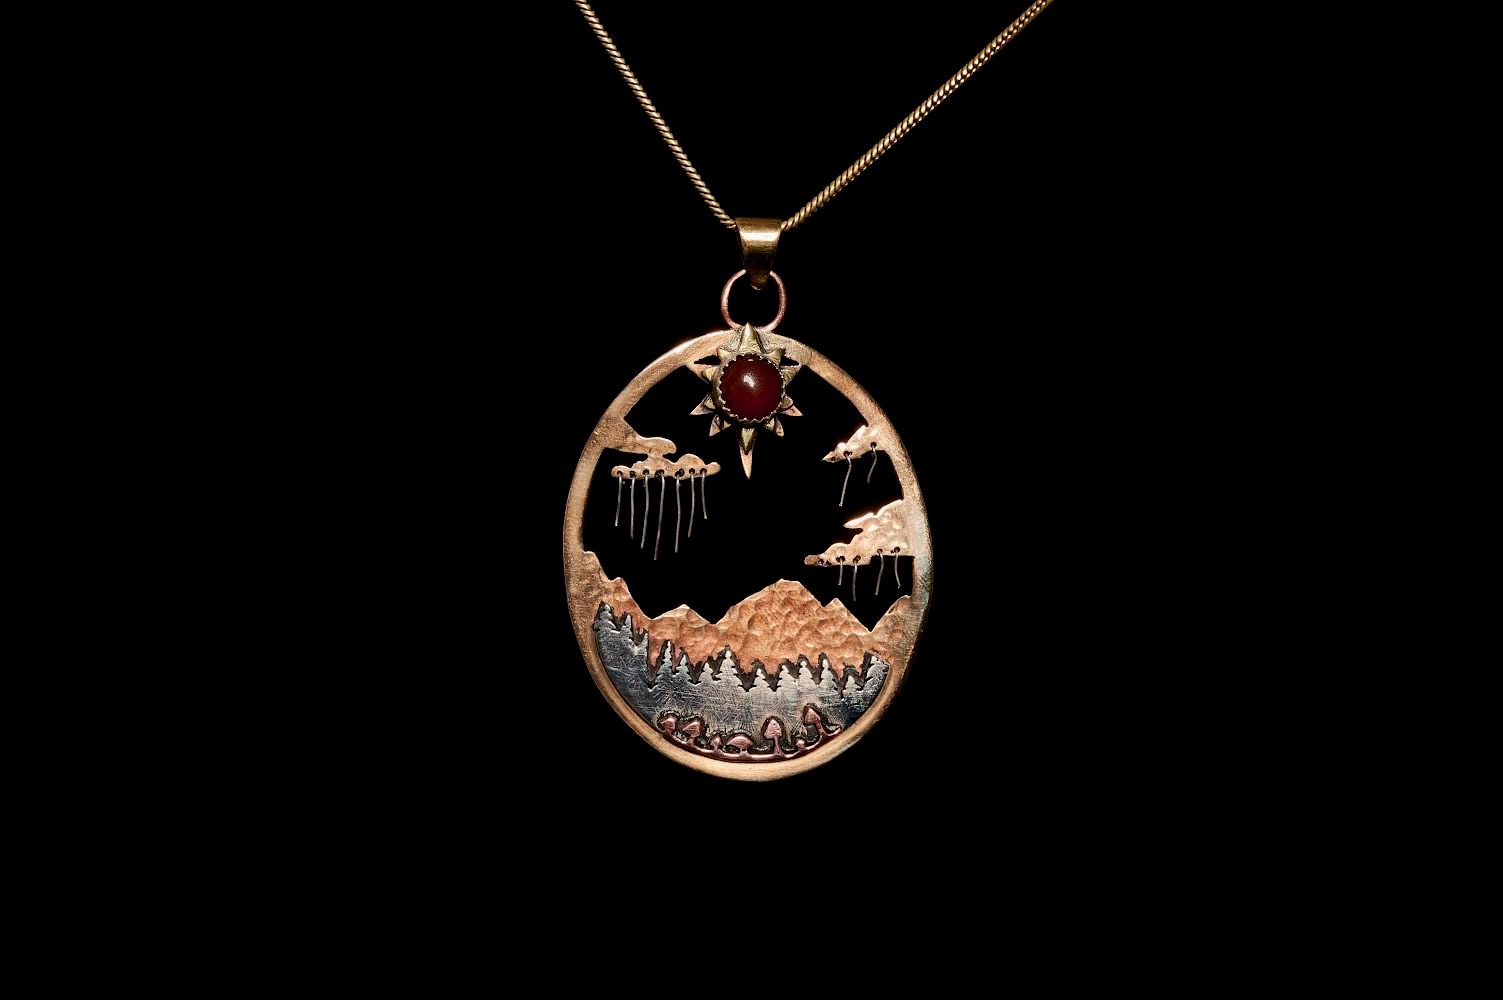 Landscape Pendant. Carnelian with NuGold, Silver, and Bronze.